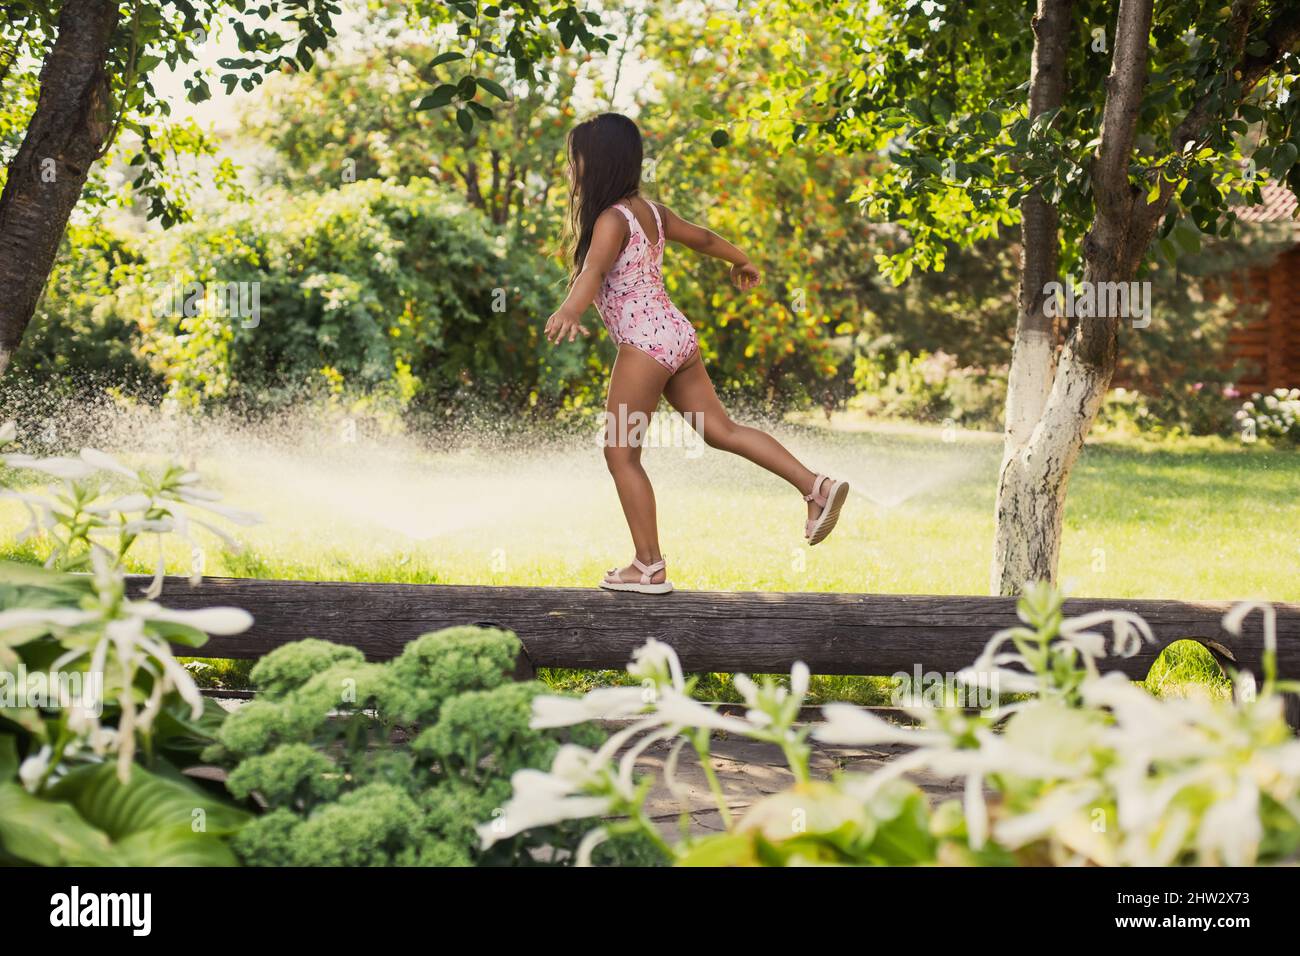 Female child having fun on log finding balance on one foot indulging with water sprinklers, house and green trees in background in daytime. Dreaming Stock Photo